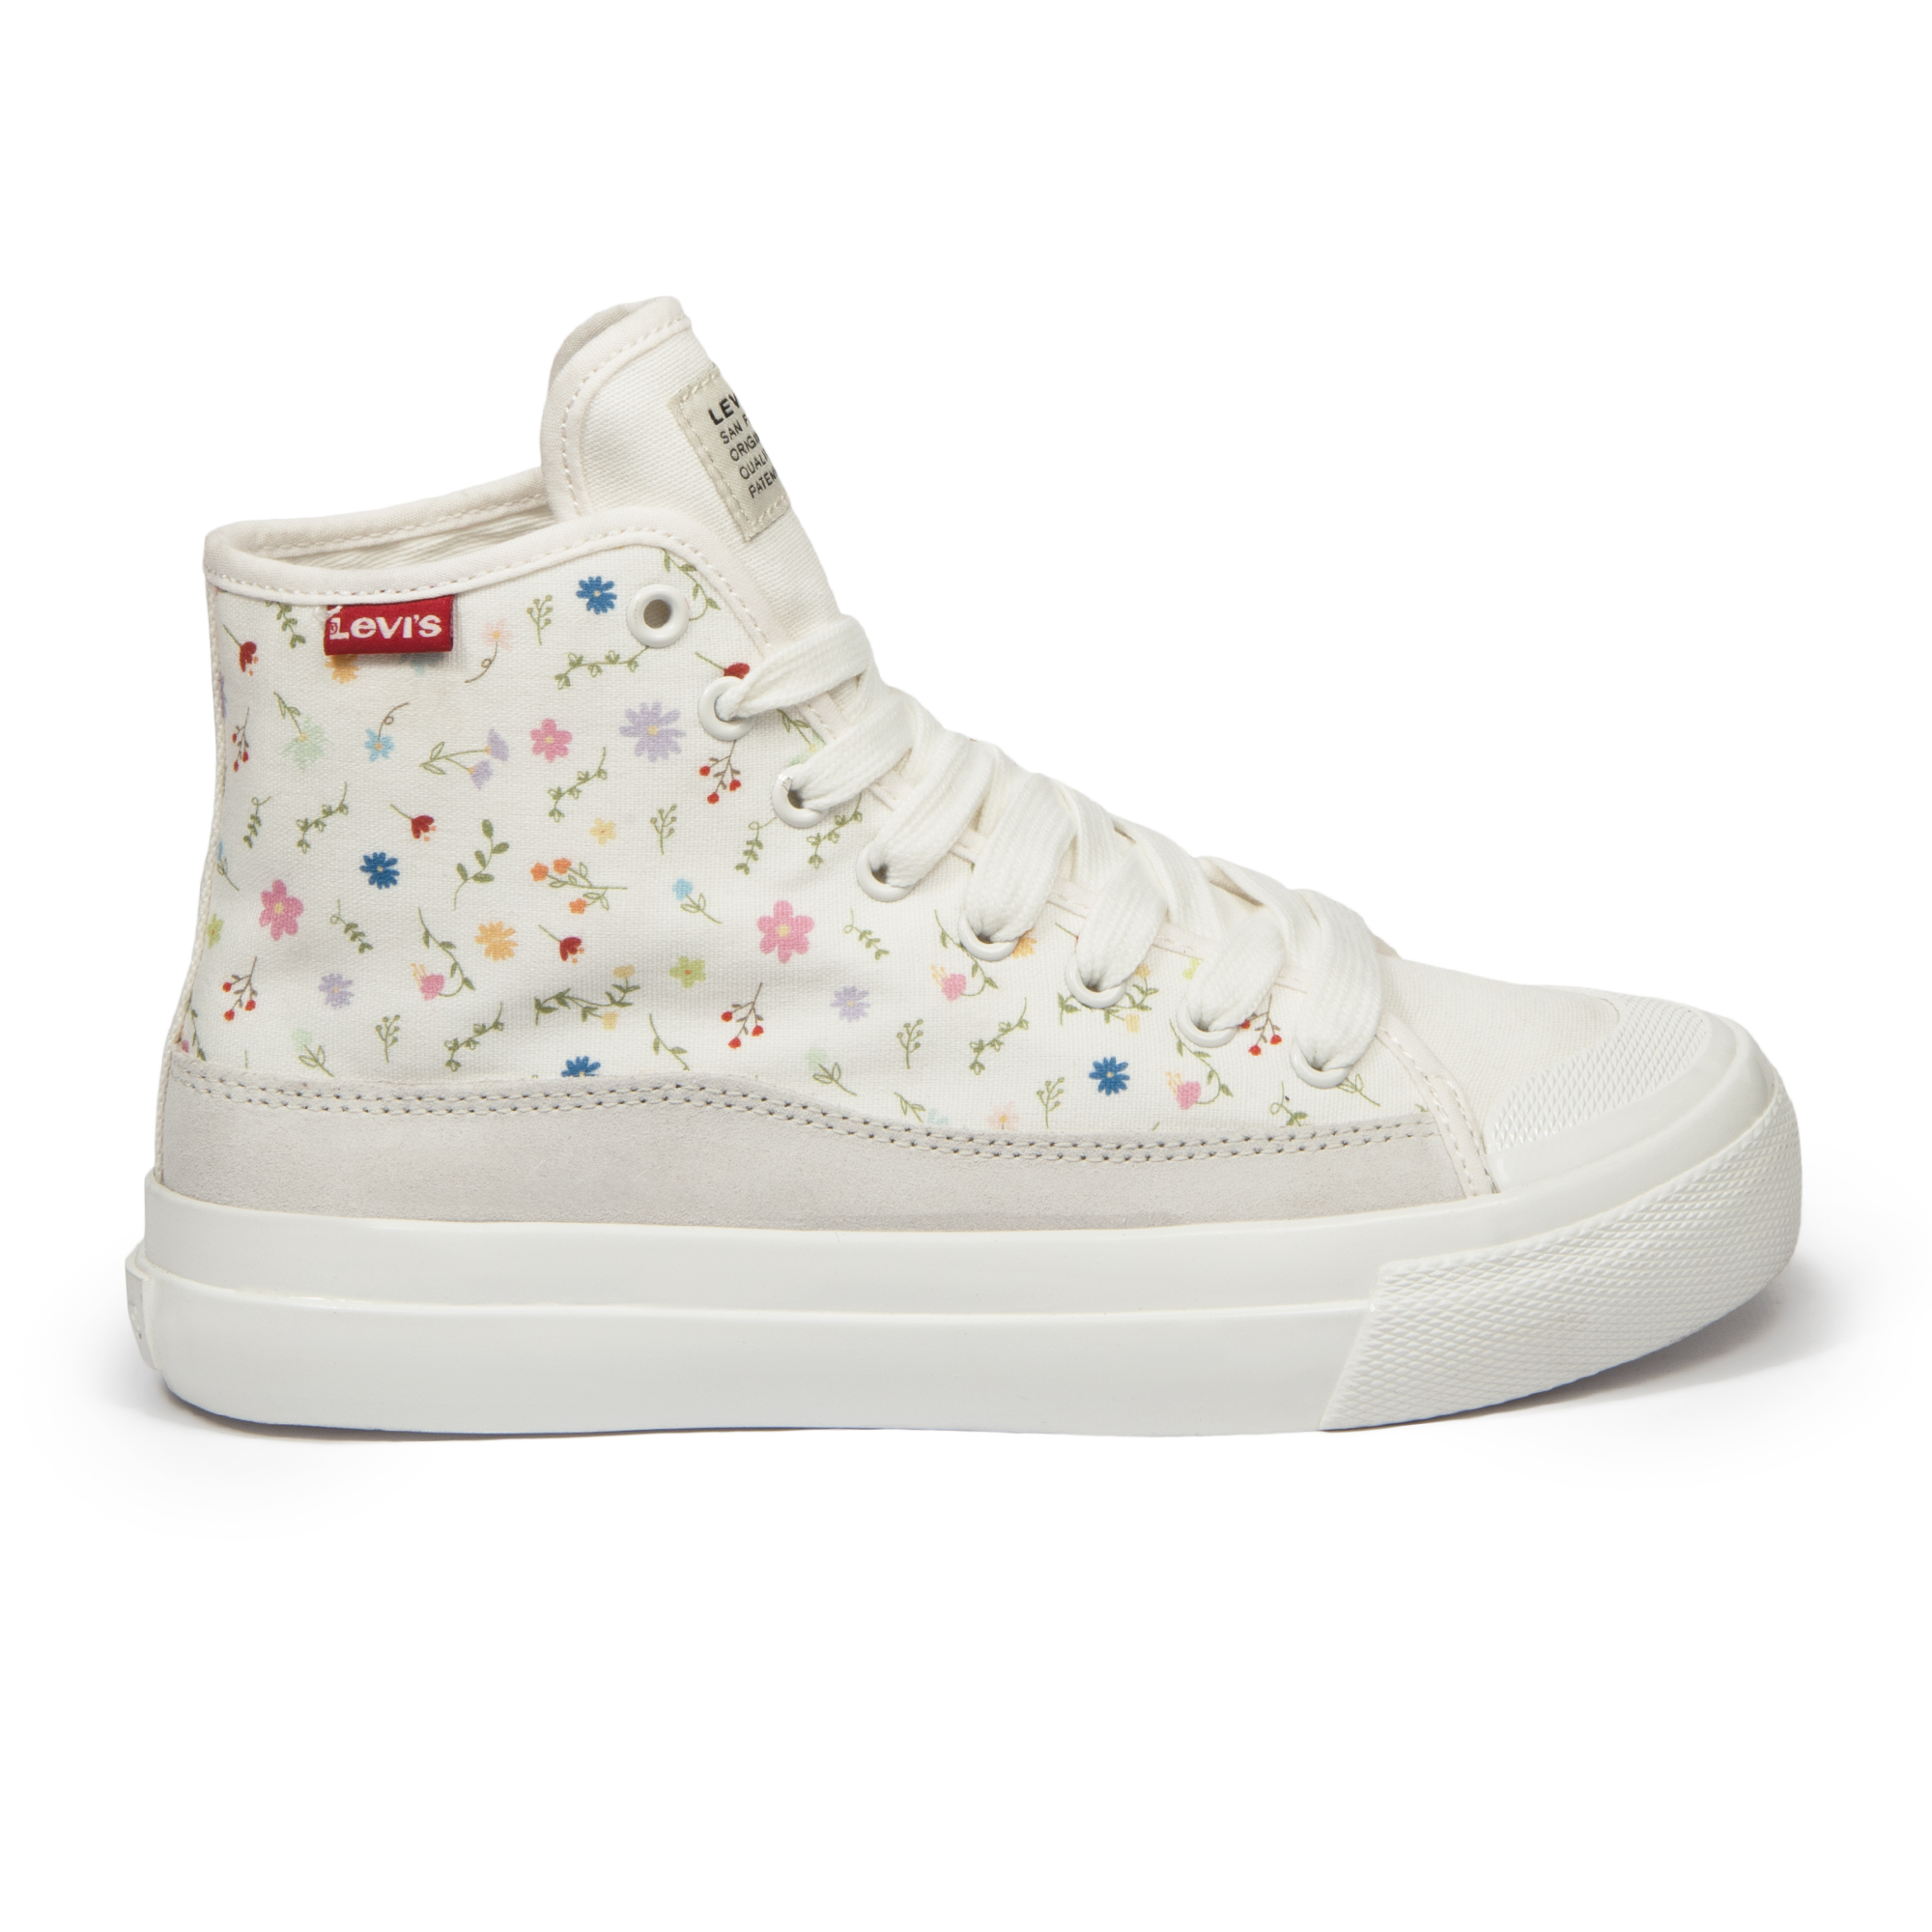 Levi's Square High S sneakers for women - Mark and Shark